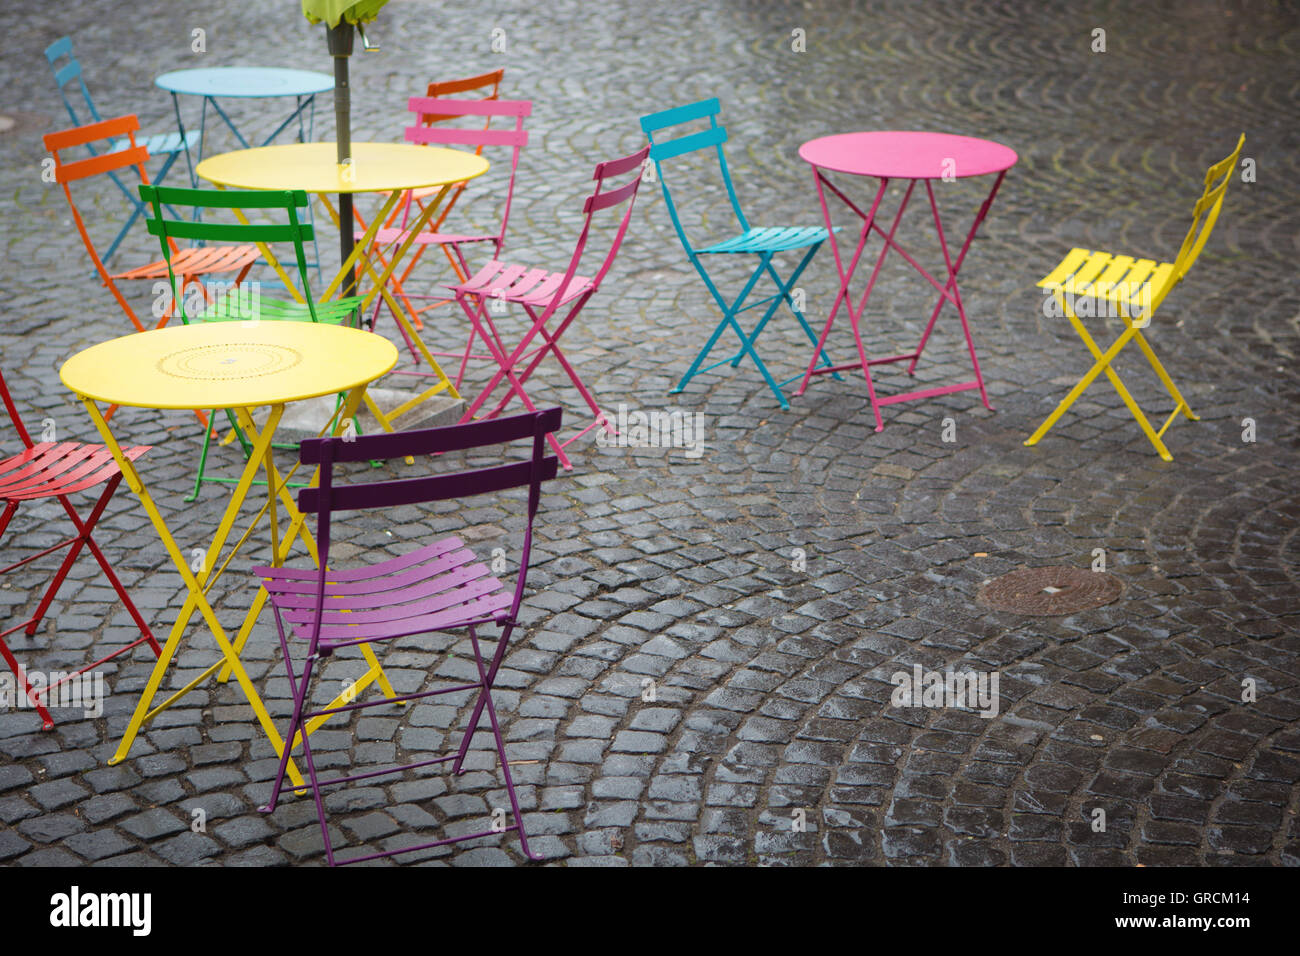 Sidewalk Cafe With Colorful Tables And Chairs Stock Photo